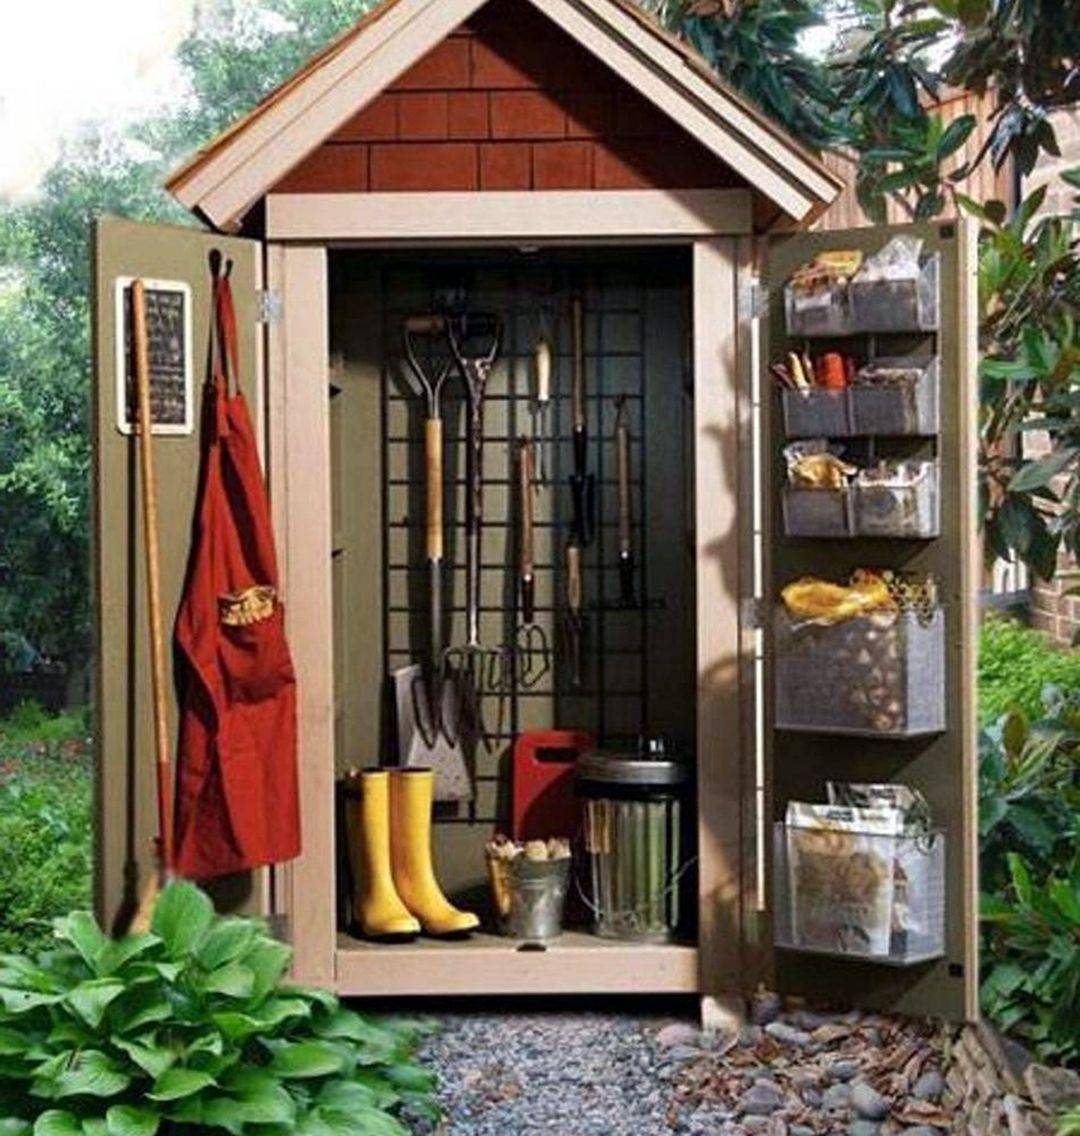 Awesome Unique Small Storage